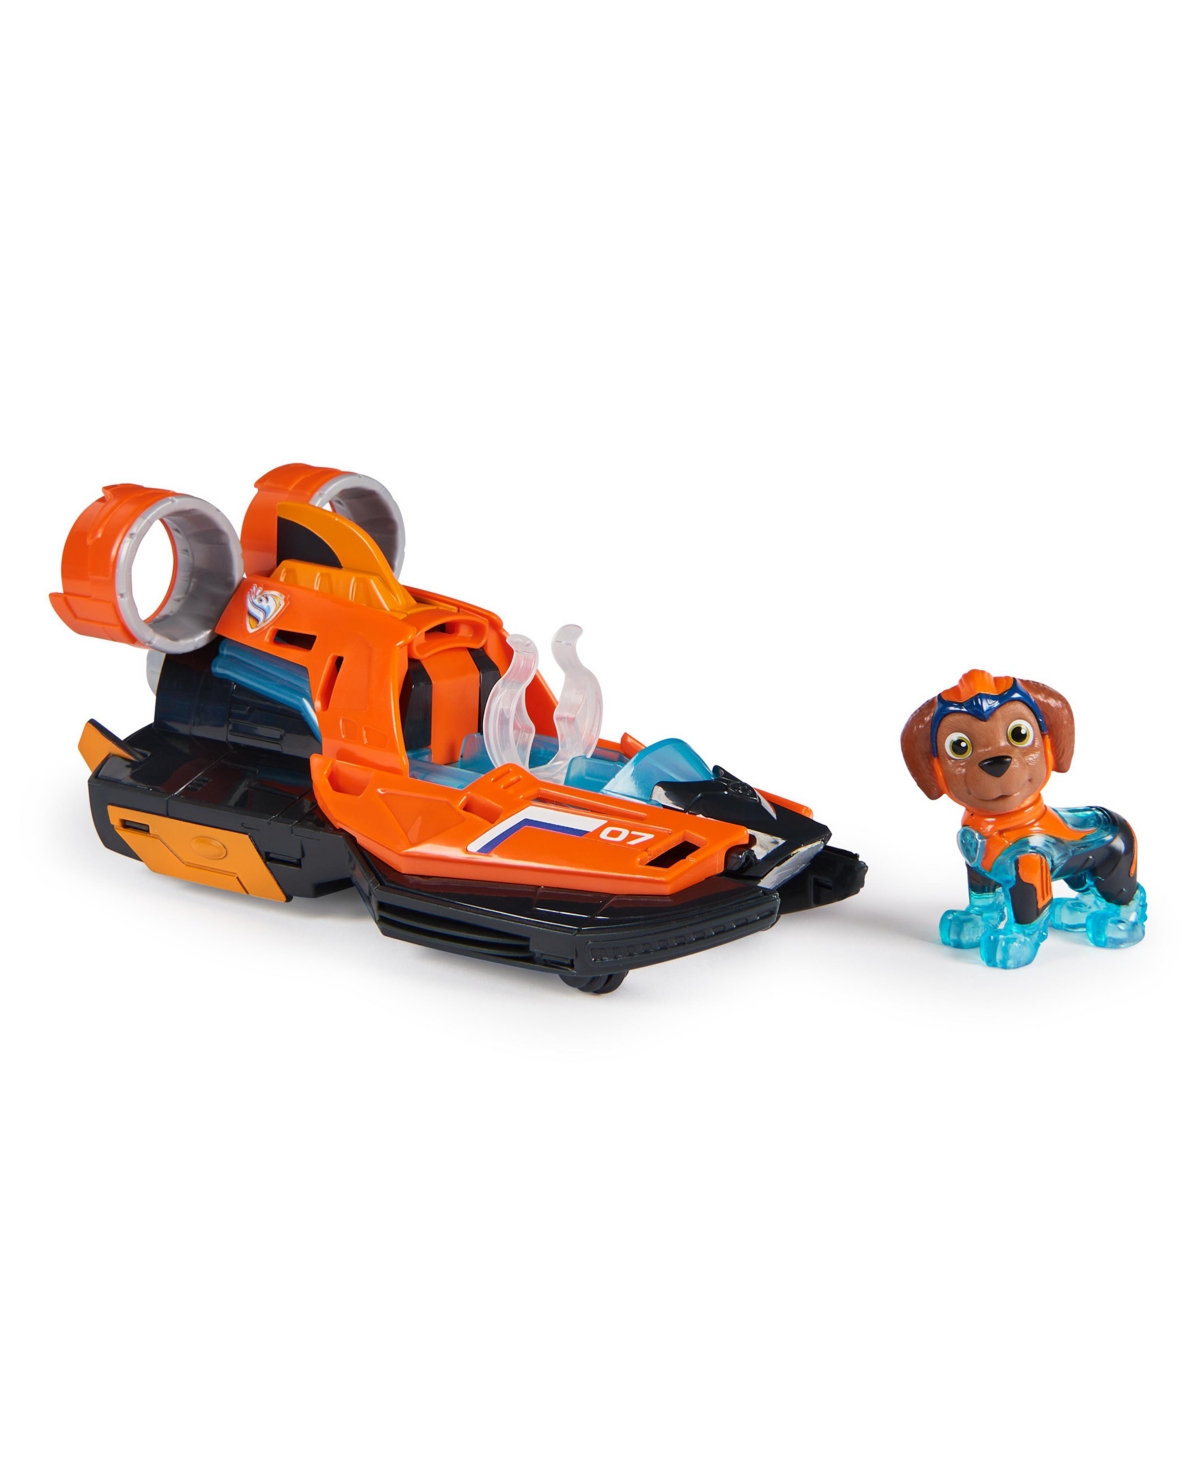 Paw Patrol Kids' - The Mighty Movie, Toy Jet Boat With Zuma Mighty Pups Action Figure In Multi-color